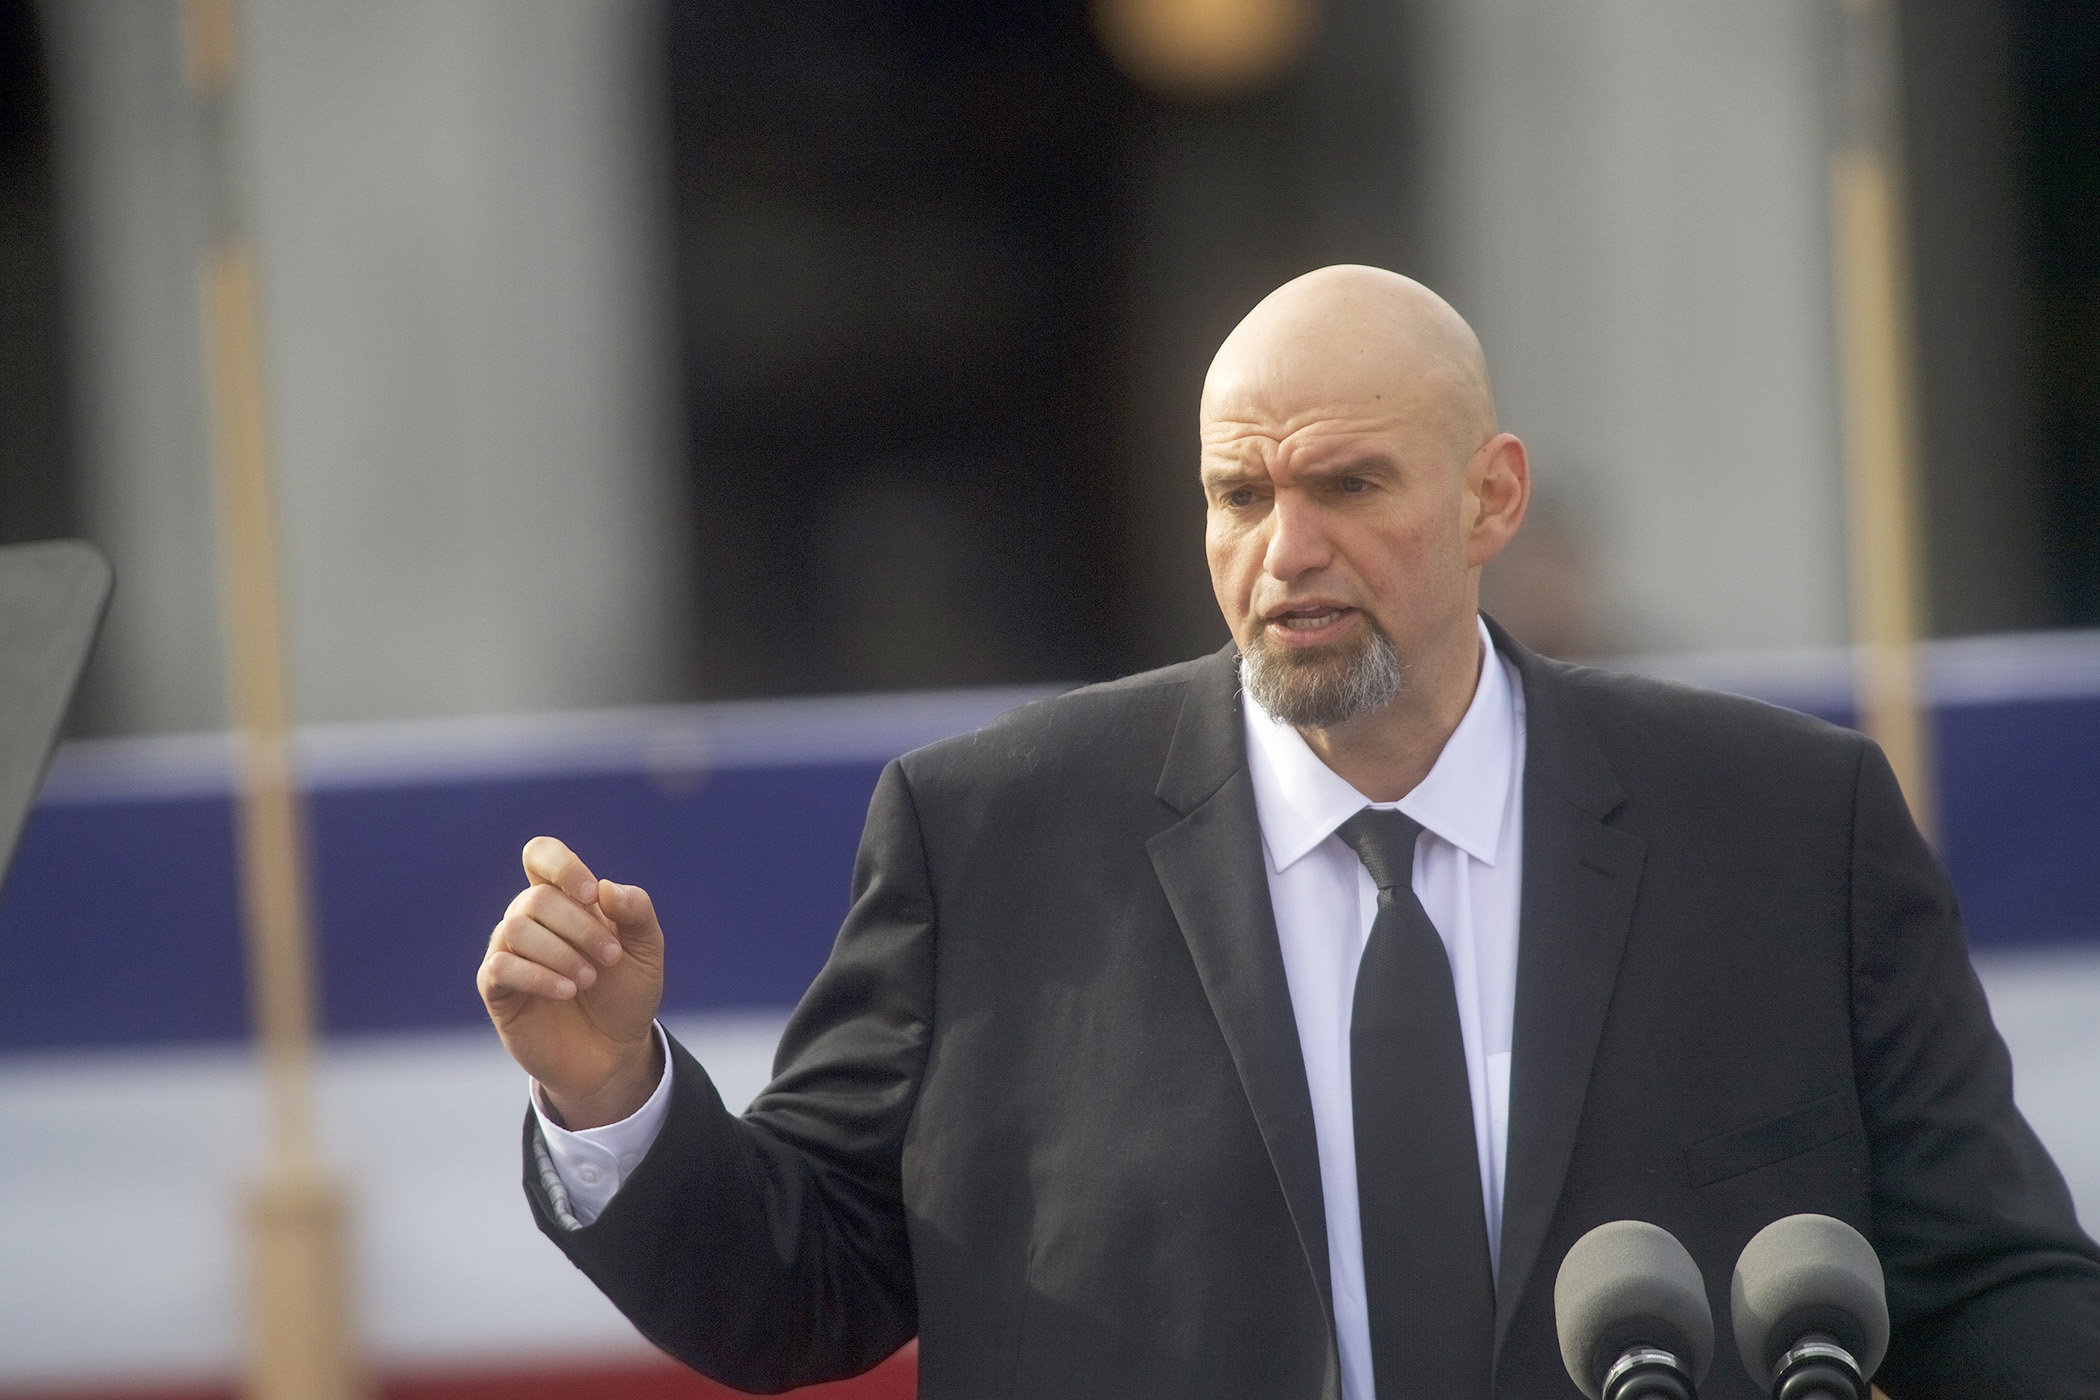 PHOTO: Lieutenant Governor John Fetterman delivers an introduction for Governor Tom Wolf during an inaugural ceremony in Harrisburg, Penn., on Jan. 15, 2019.